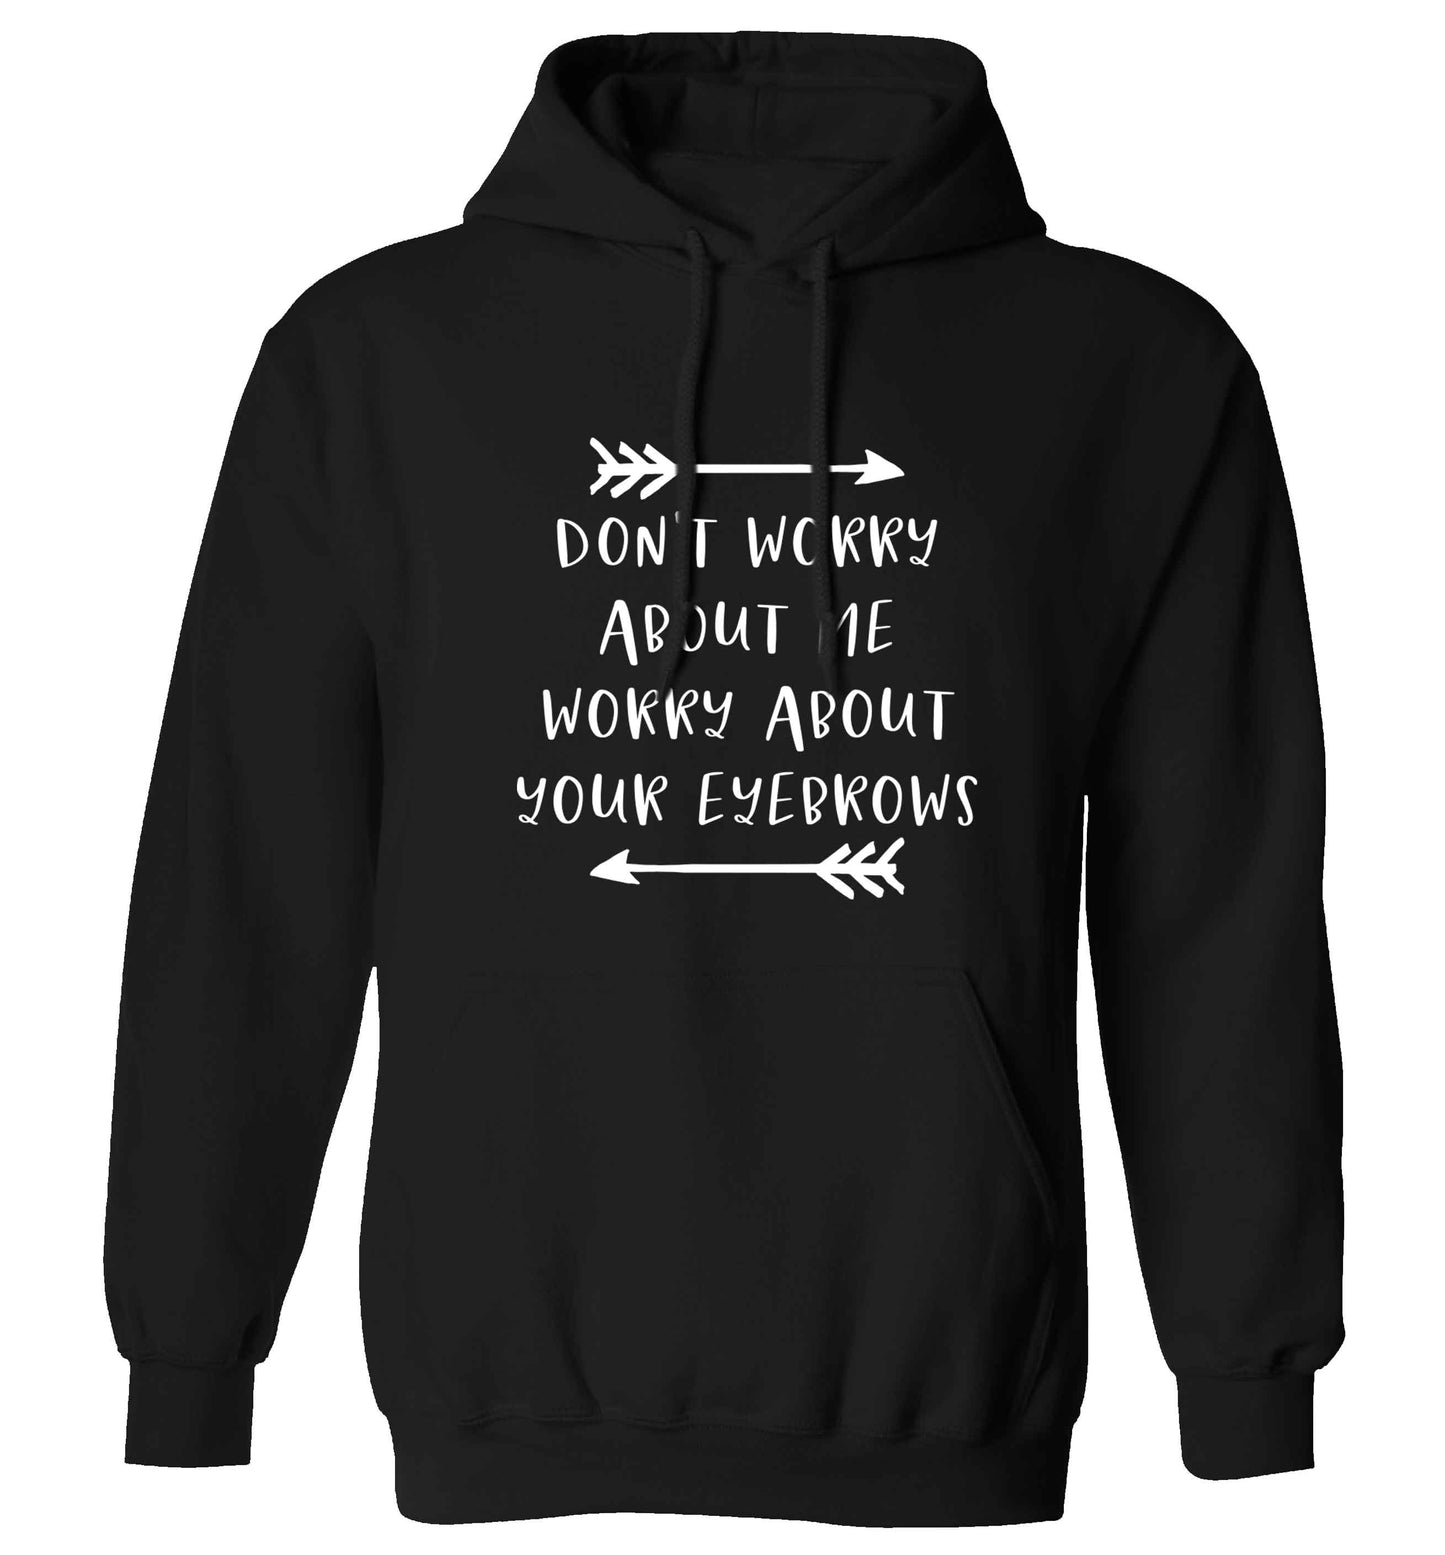 Don't worry about me worry about your eyebrows adults unisex black hoodie 2XL